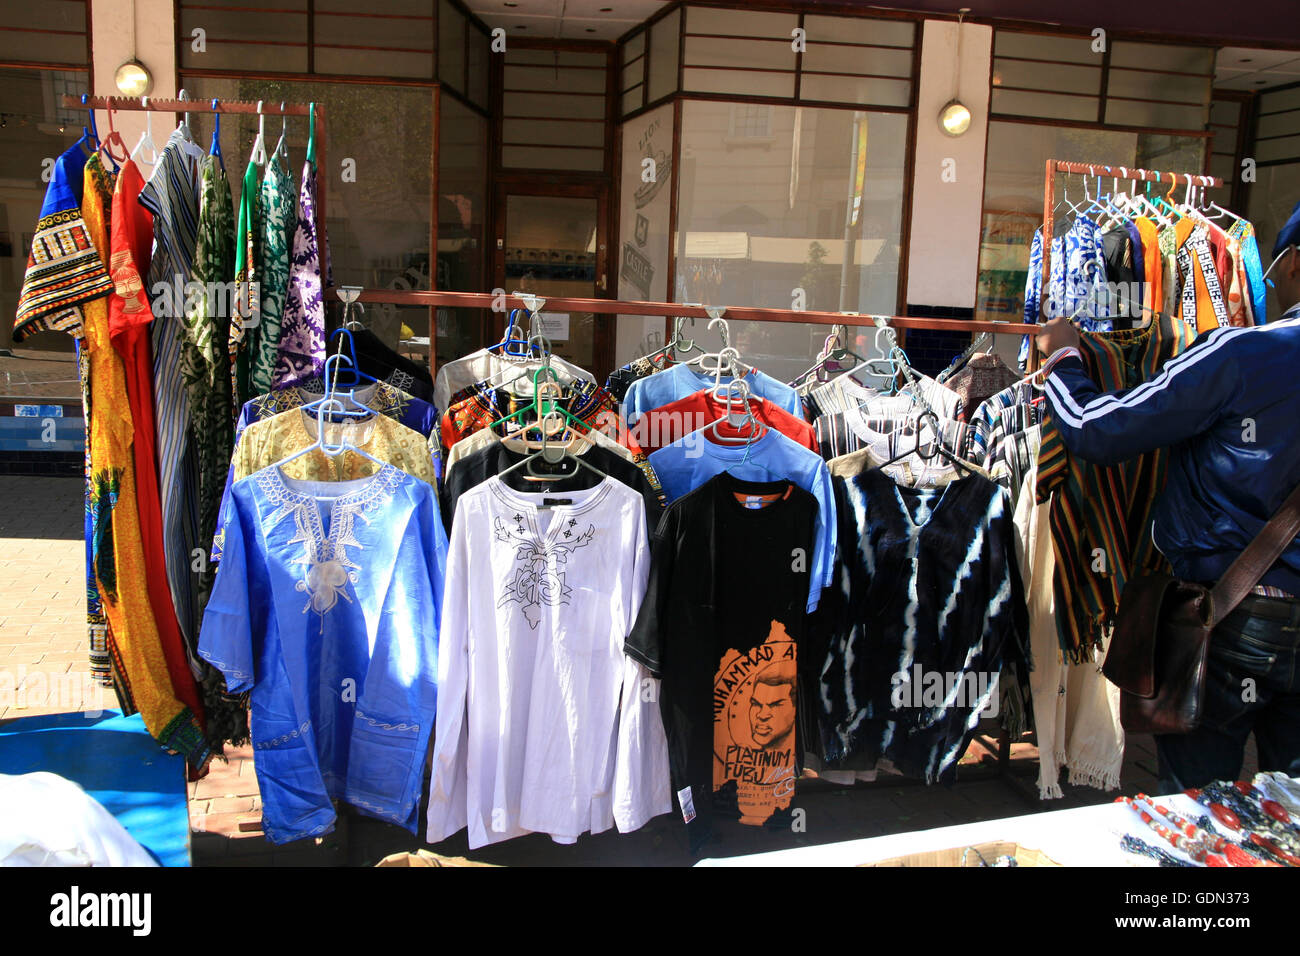 Souvenirs in front of The Market Theatre, Johannesburg, Gauteng, South ...